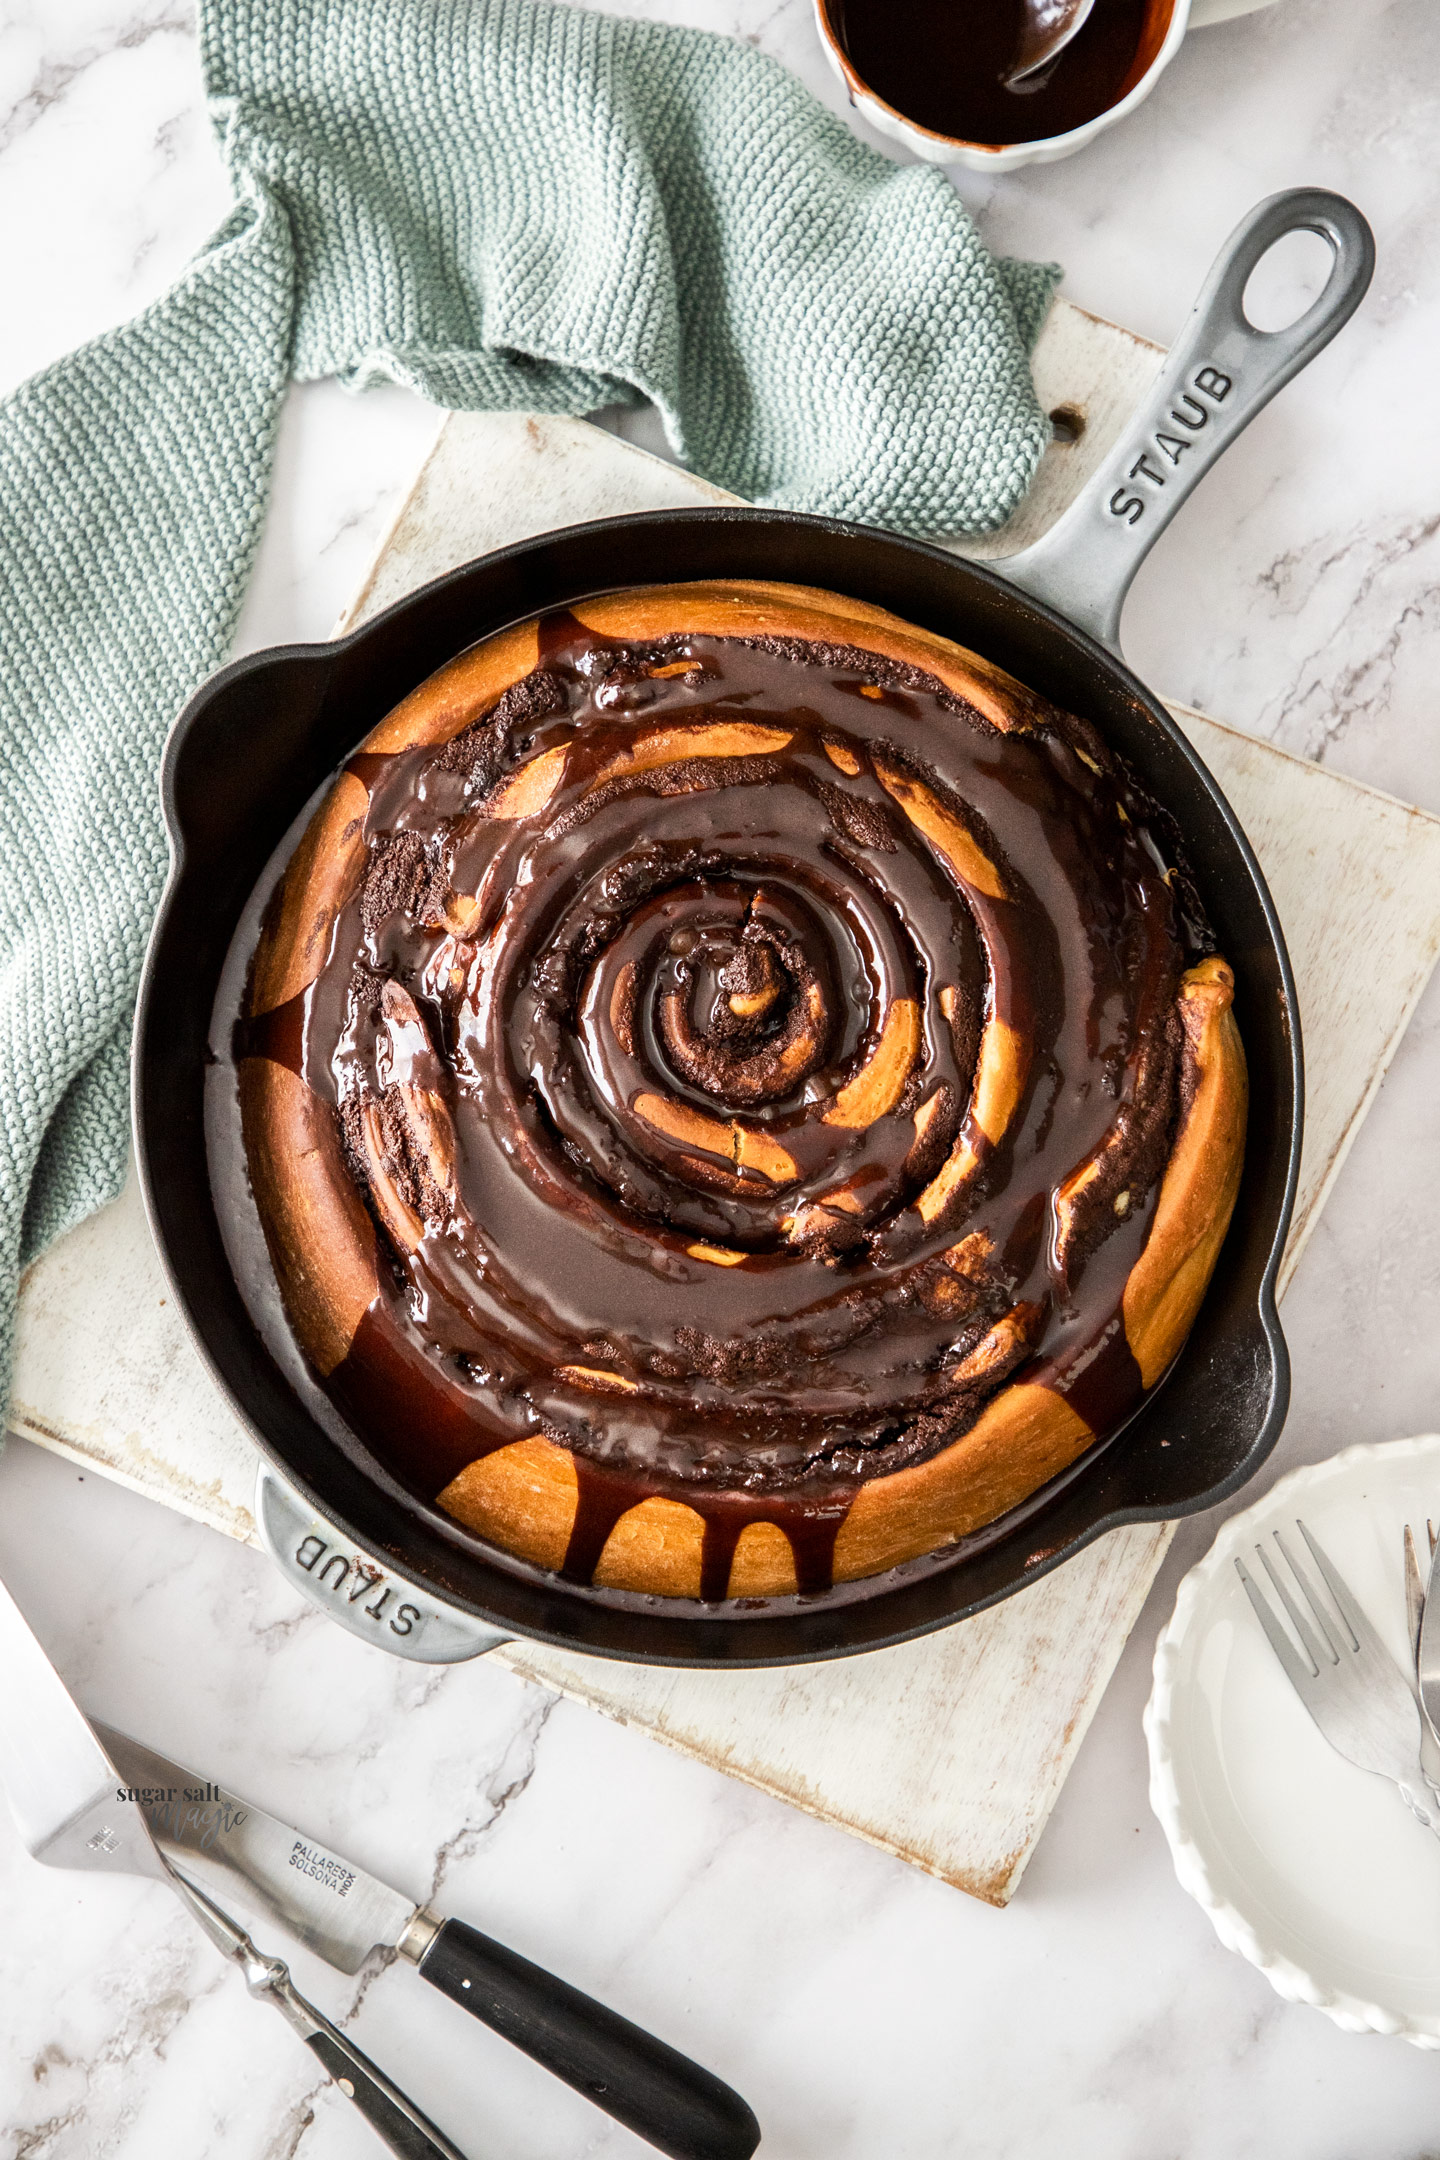 Top down view of a chocolate scroll coated in chocolate sauce.